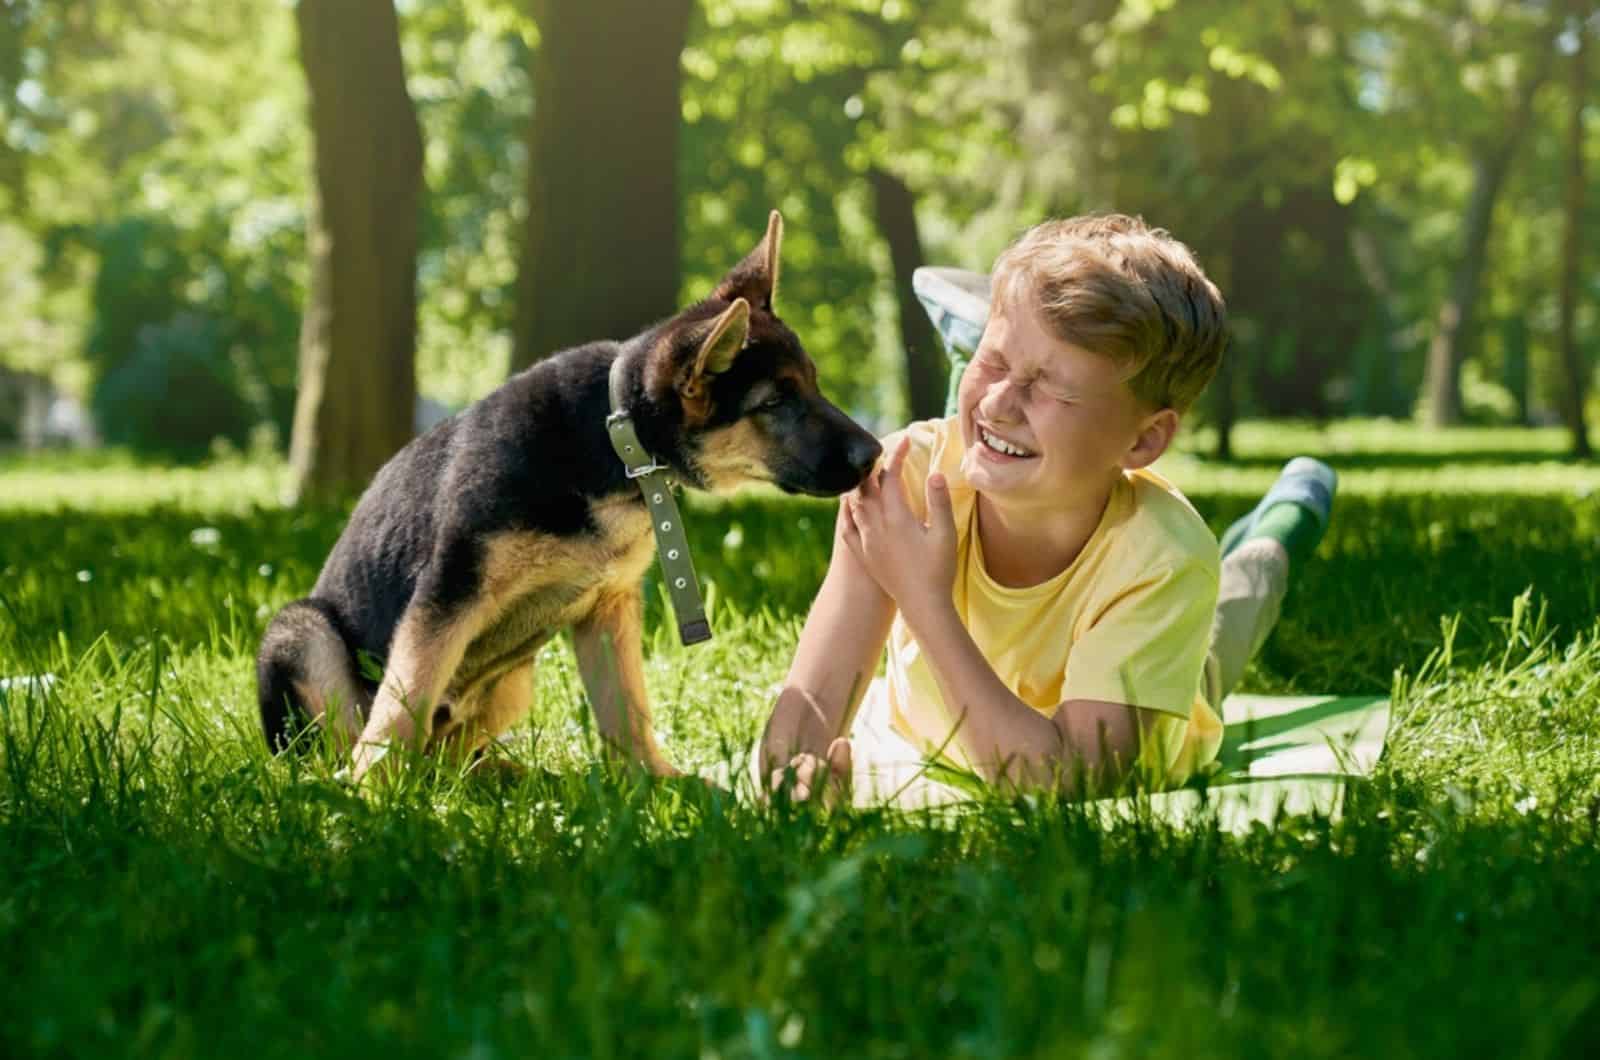 german shepherd puppy licking hands of smiling boy in the park